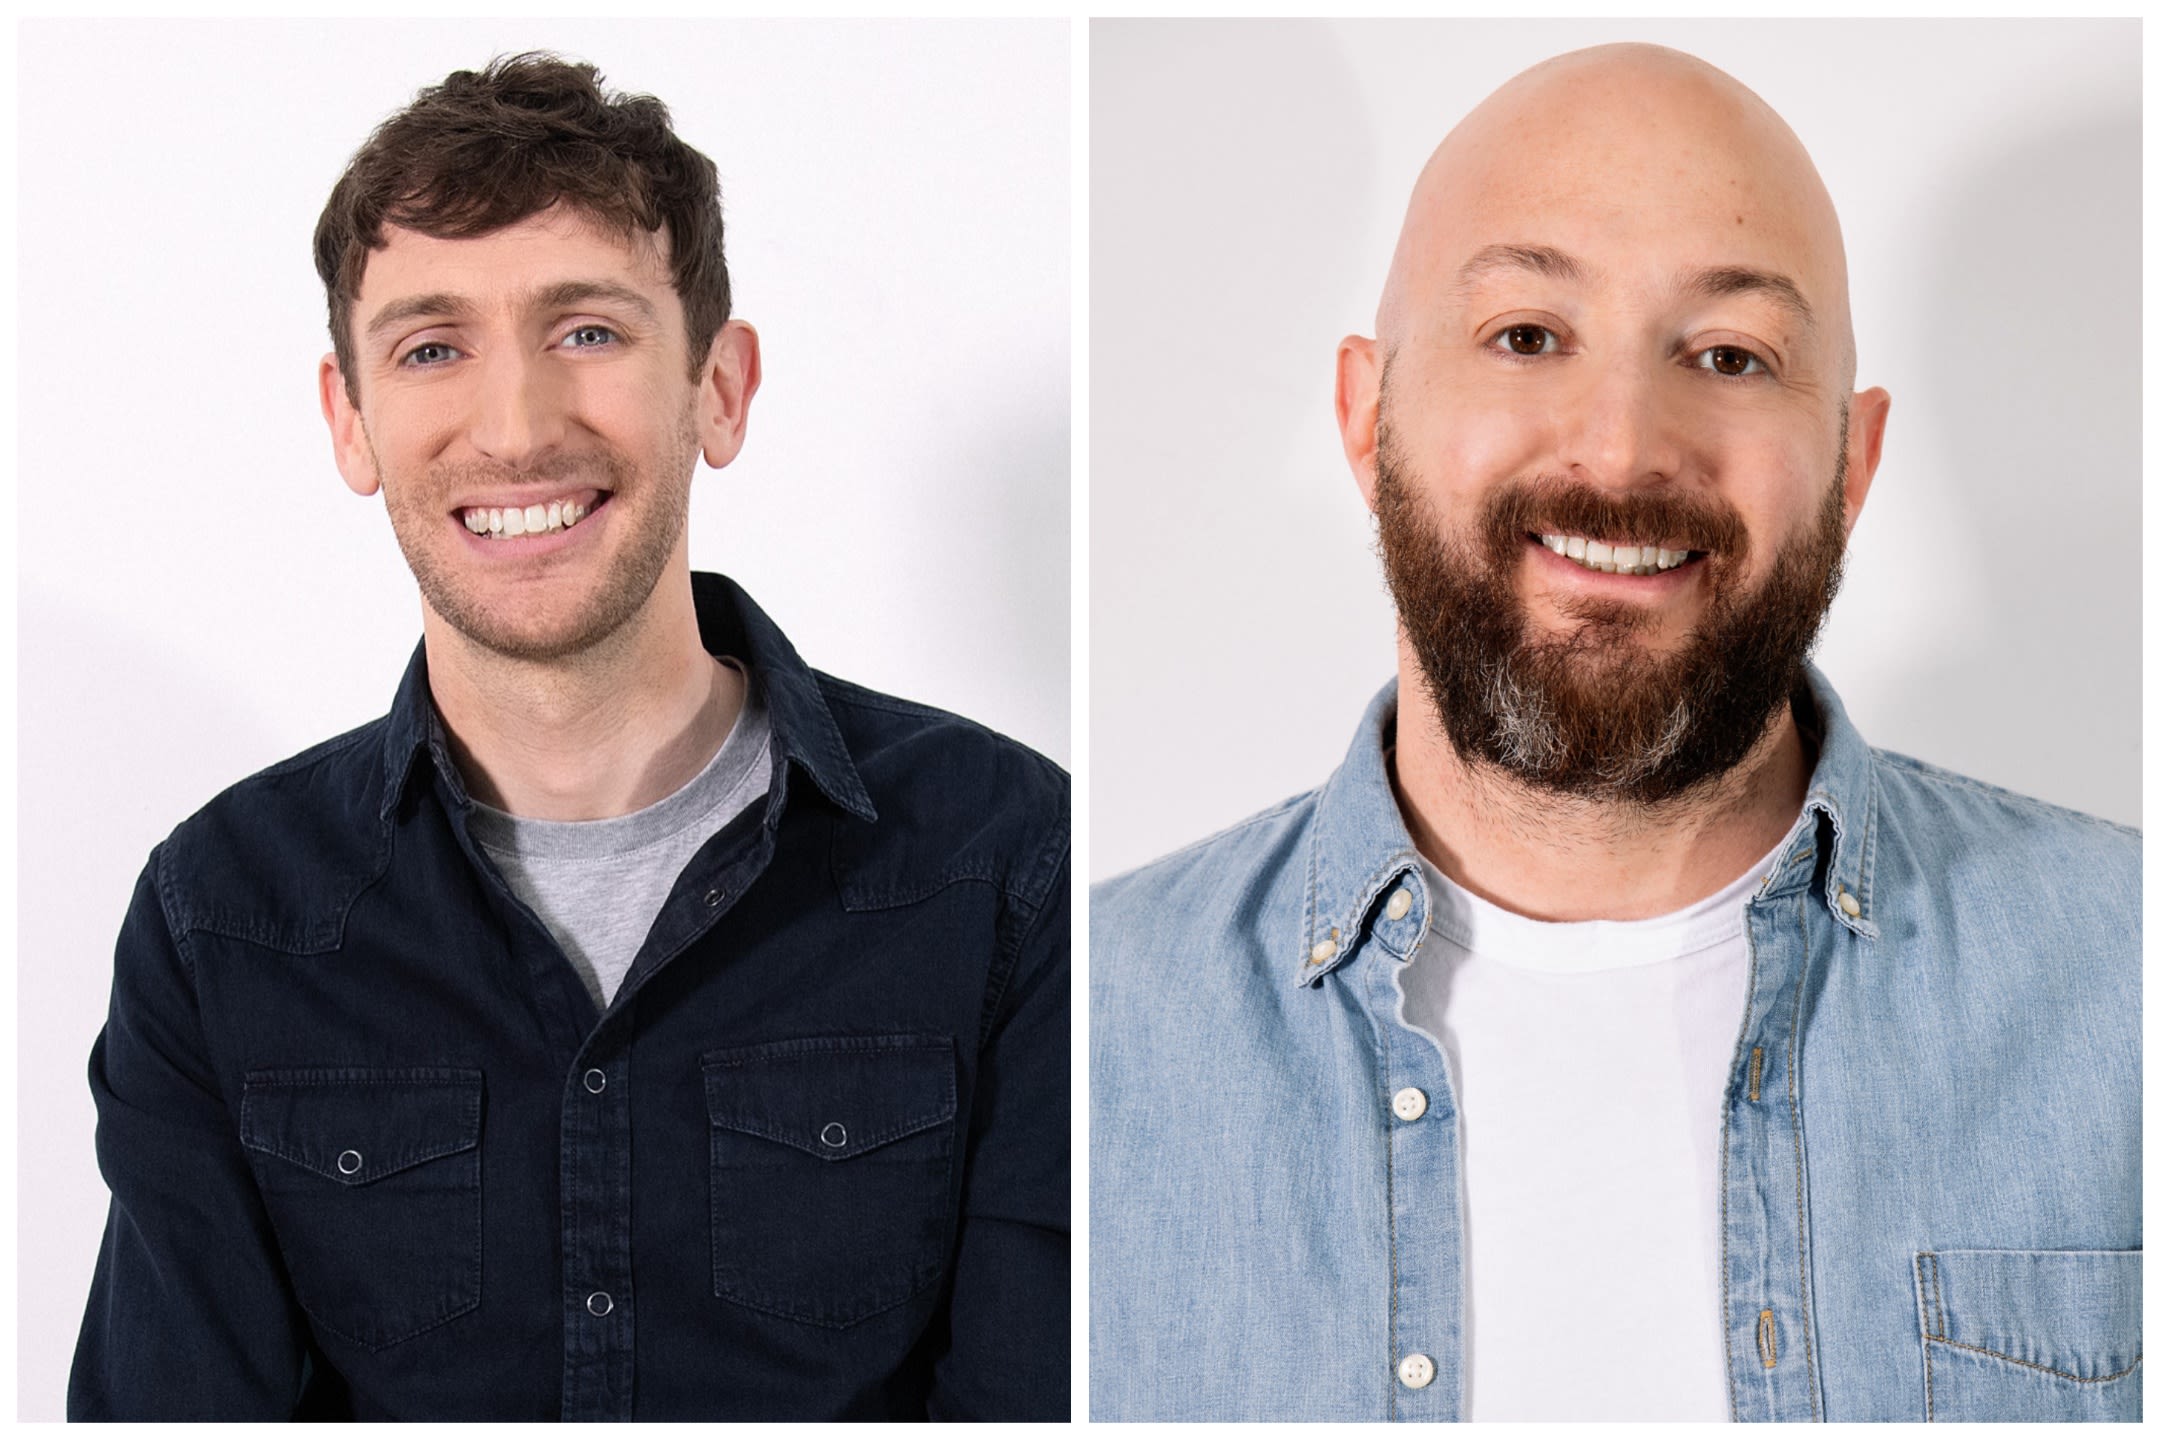 ‘Universal Basic Guys’ Creators Adam and Craig Malamut Ink Sony TV Overall Deal (EXCLUSIVE)